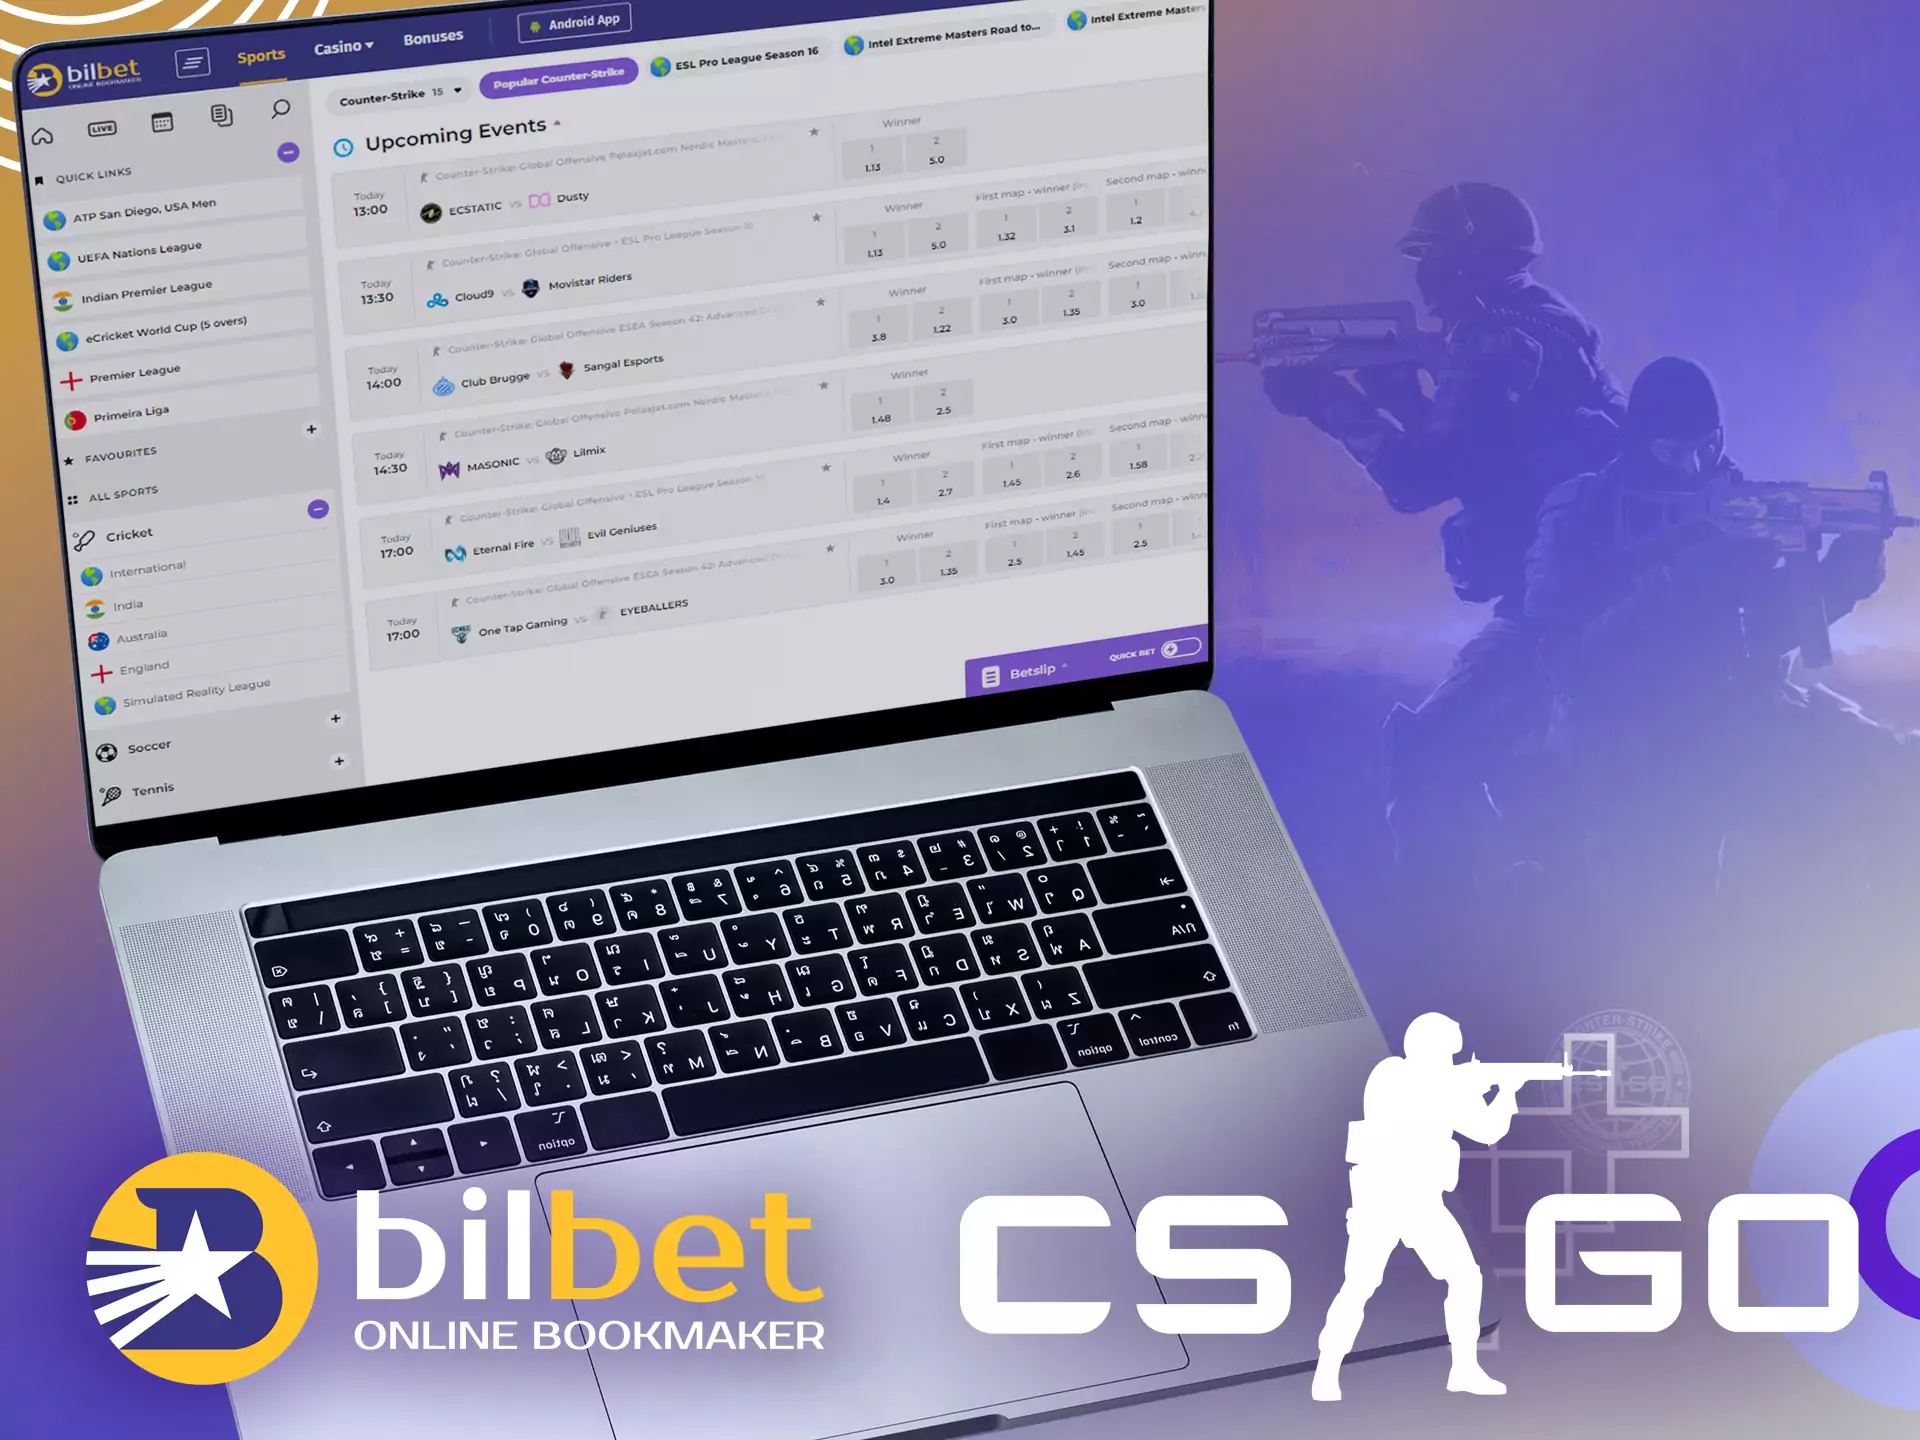 If you are a fan of CS:GO, try betting in the Bilbet sportsbook.